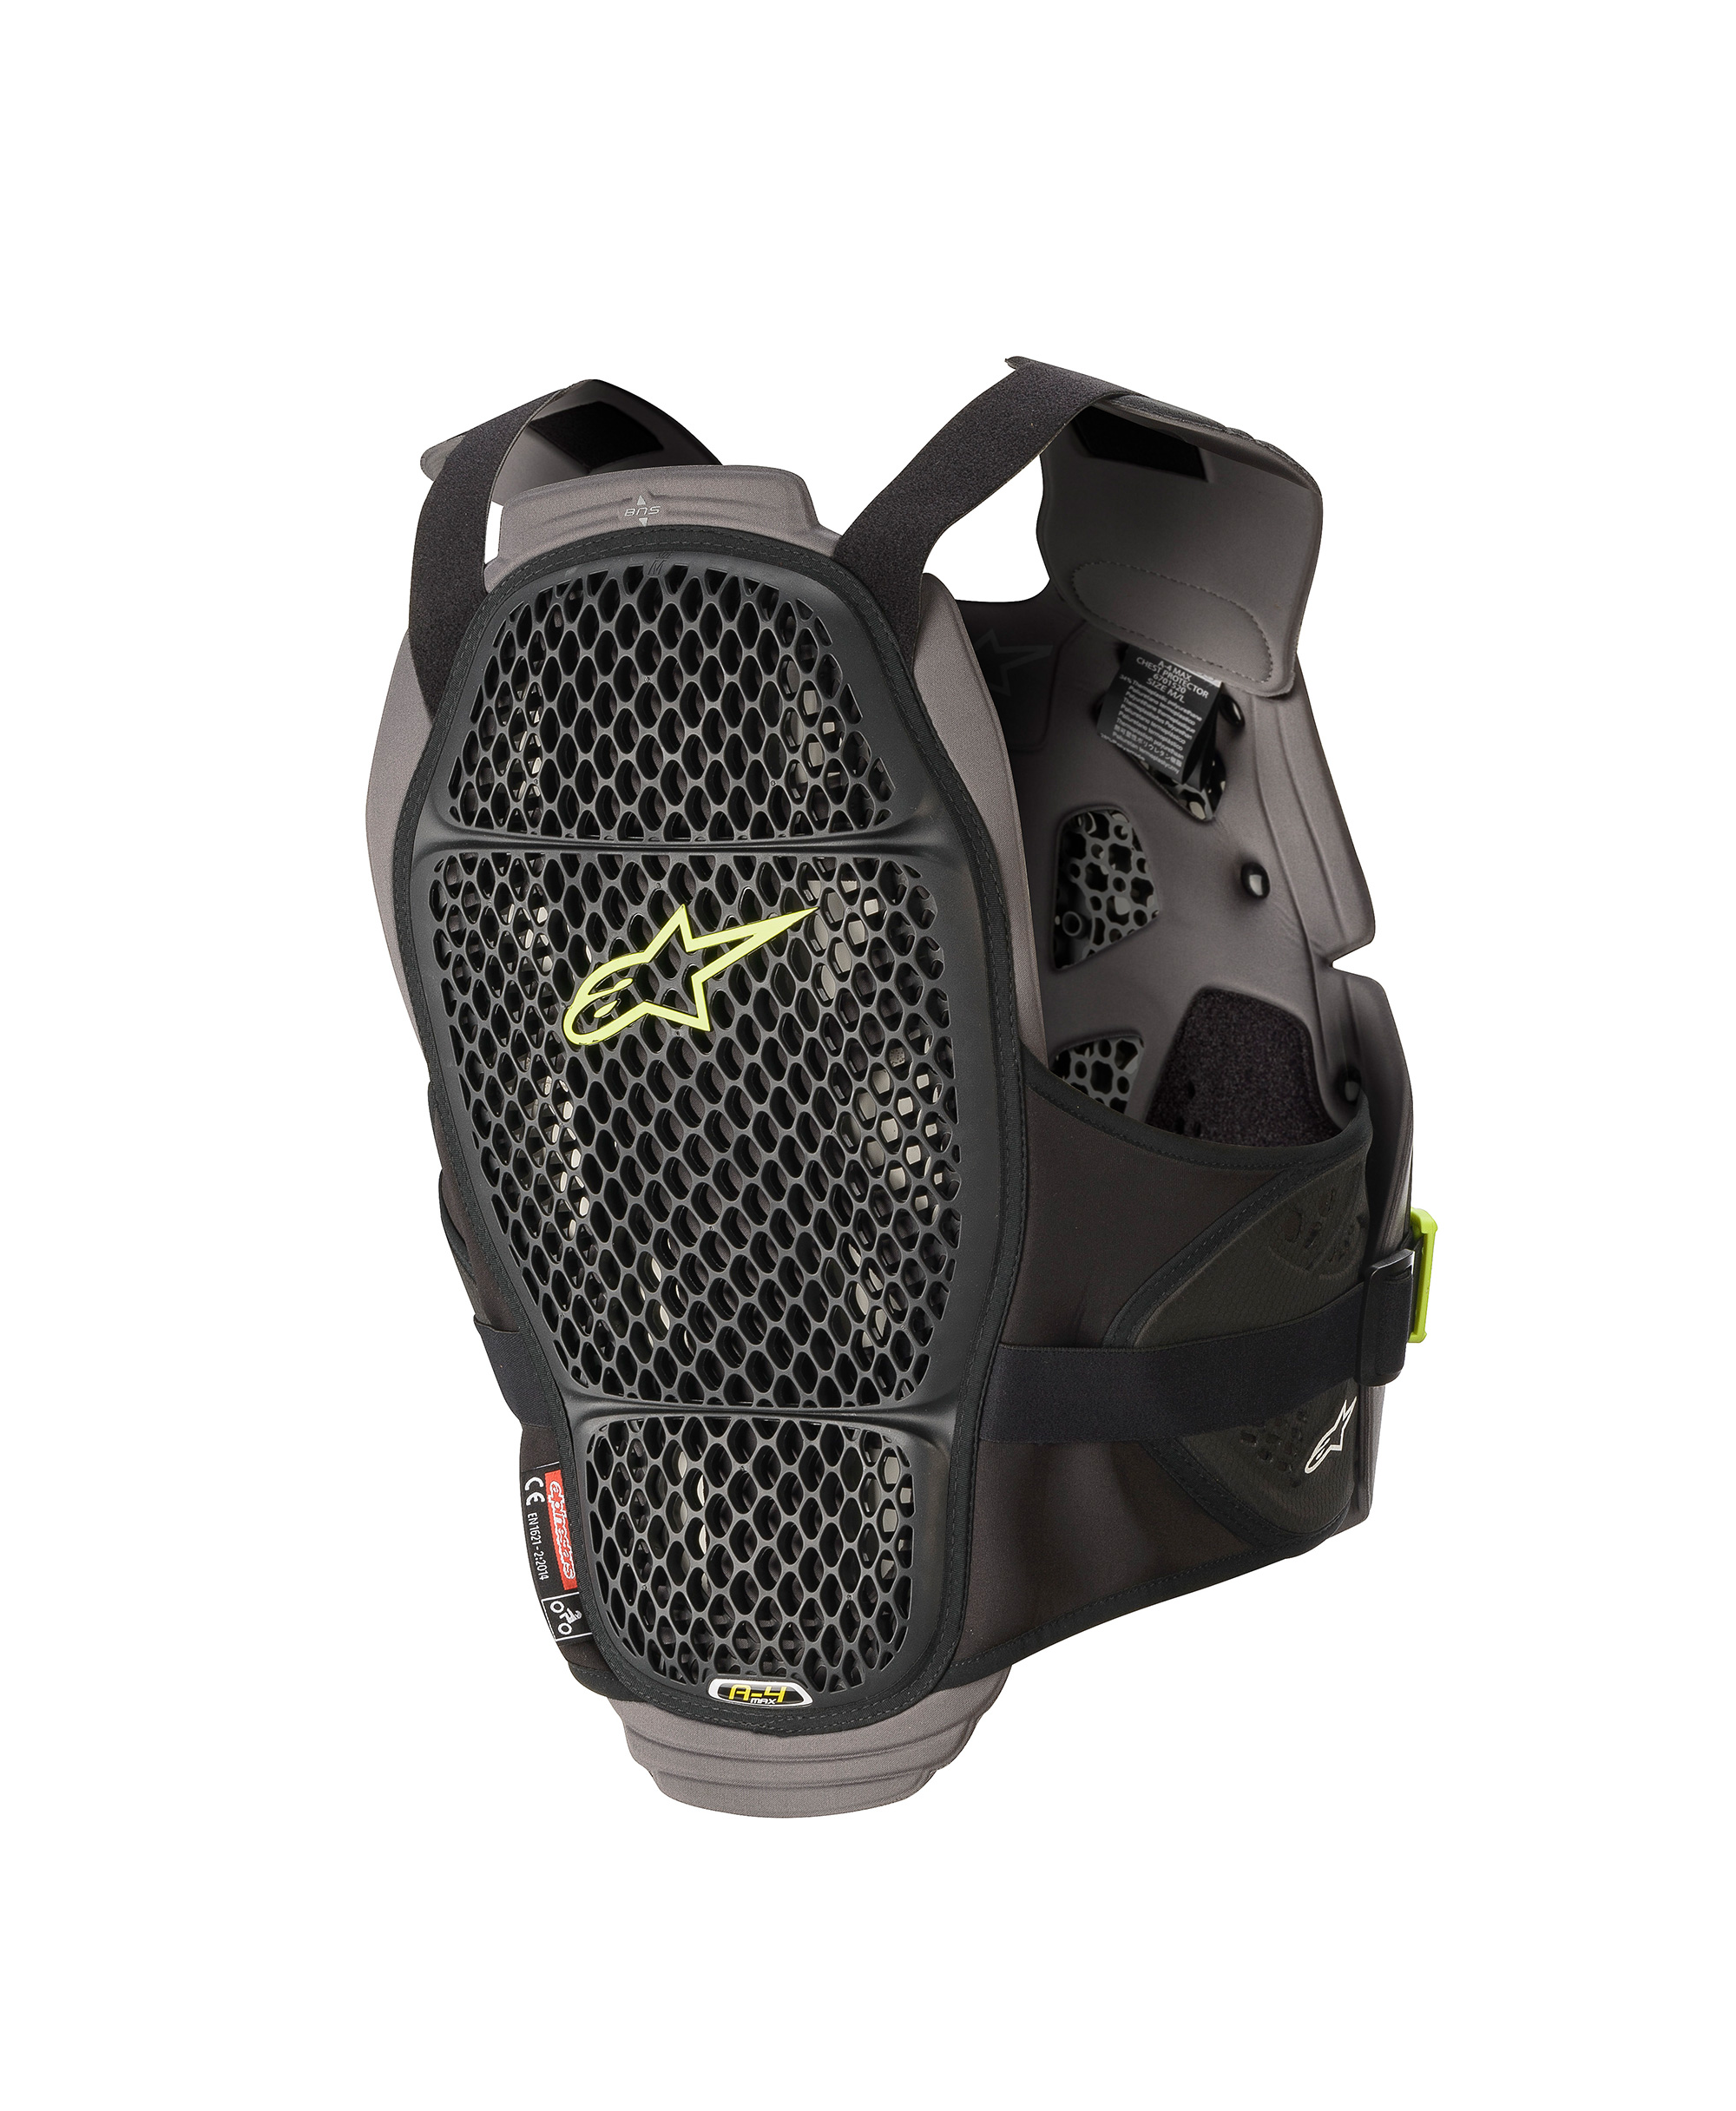 A-4 MAX CHEST PROTECTOR BLACK ANTHRACITE YELLOW FLUO